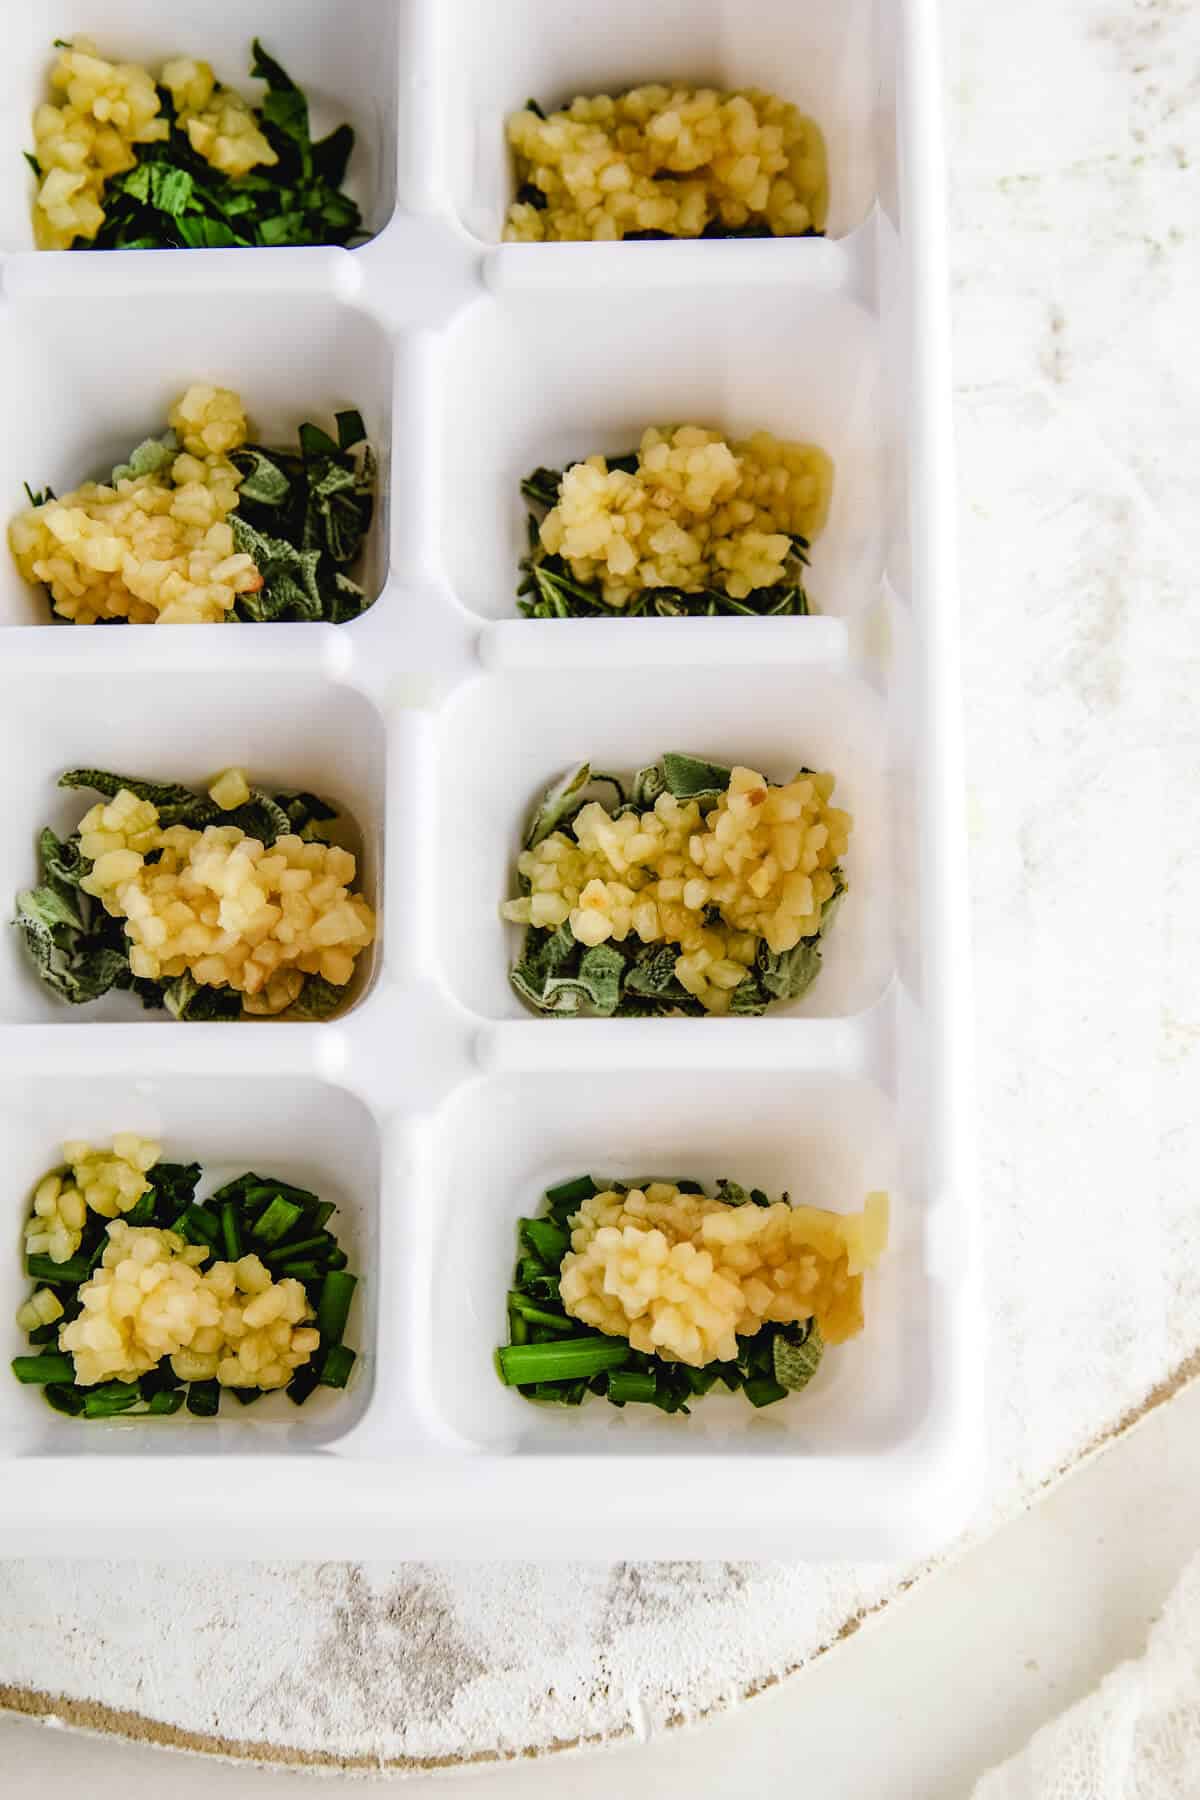 a close up image of minced garlic on top of fresh herbs chopped and placed in a white ice cube tray